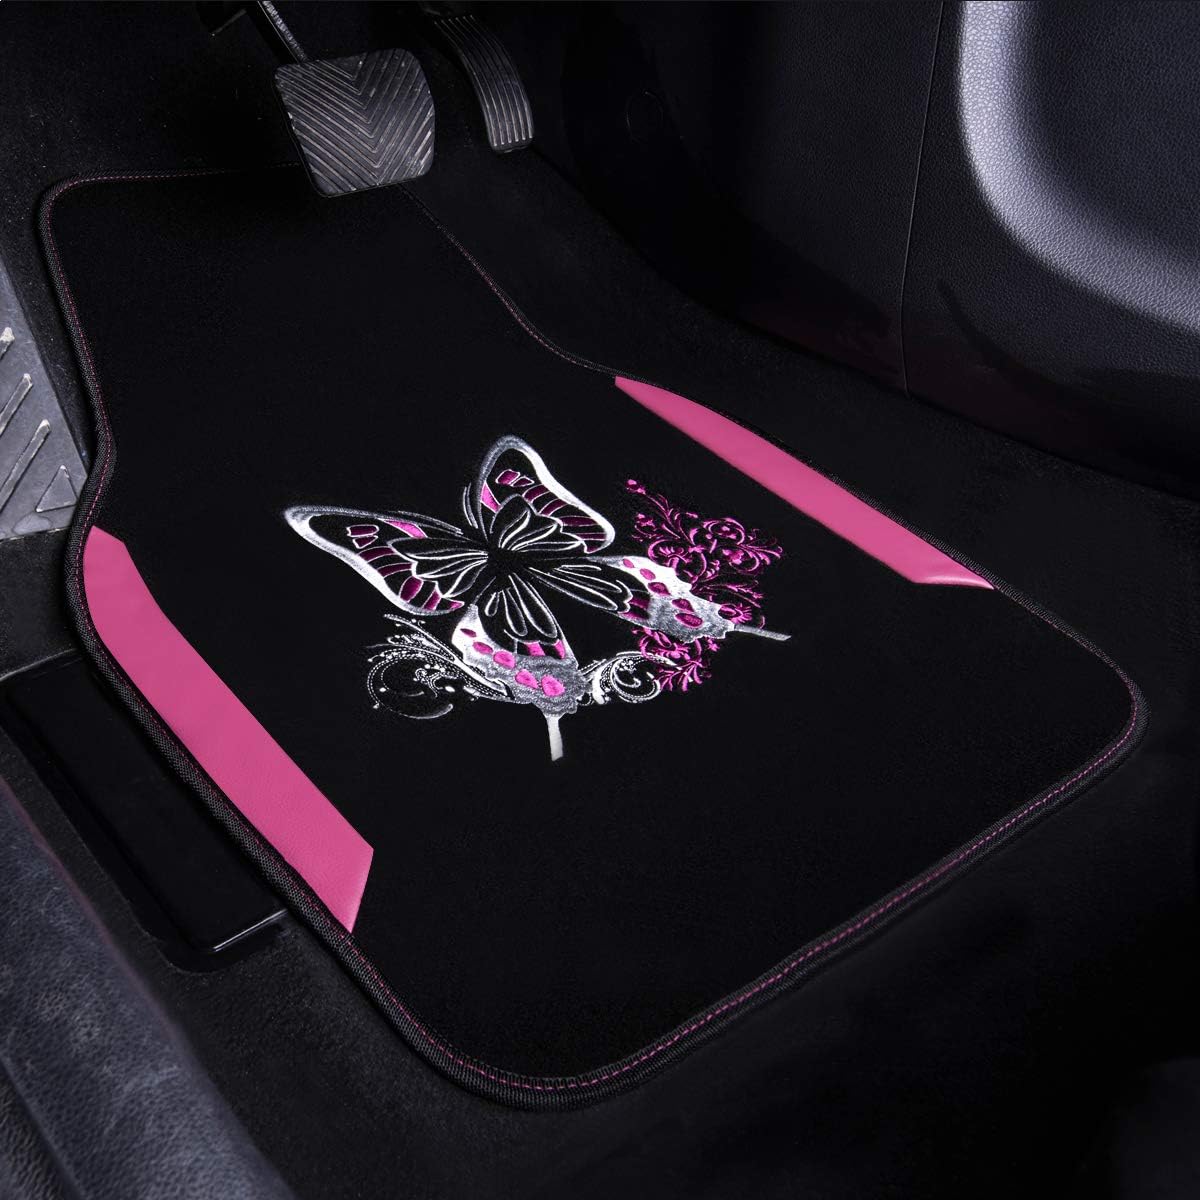 CAR PASS Universal Pink Car Seat Covers and Car Floor Mats Sets with Butterfly, for Women Cute Girls, Fit for Sedans,Cars,Vans